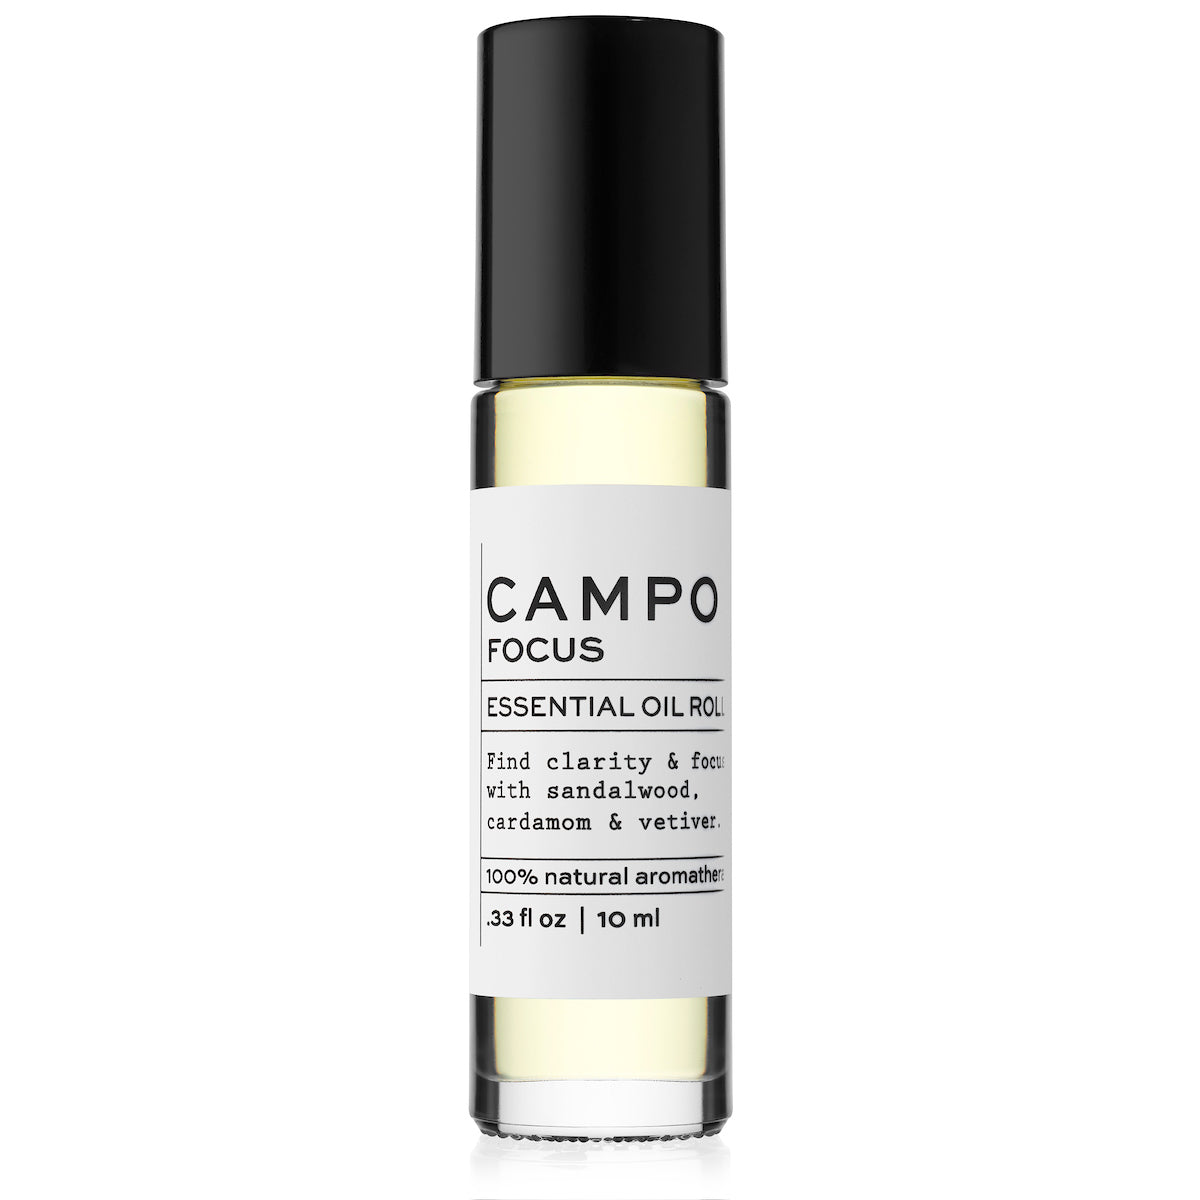 Campo Beauty Essential Oil FOCUS Blend Roll-On that in 10 ml. Inspires feelings of peace and tranquility to promote heightened awareness and mental clarity. Feel clarity and grounded with this 100% natural essential oil roll-on blend of Australian Sandalwood, Cardamom, Vetiver &amp; Cedarwood Atlas, Himalayan, Texas &amp; Virginia.